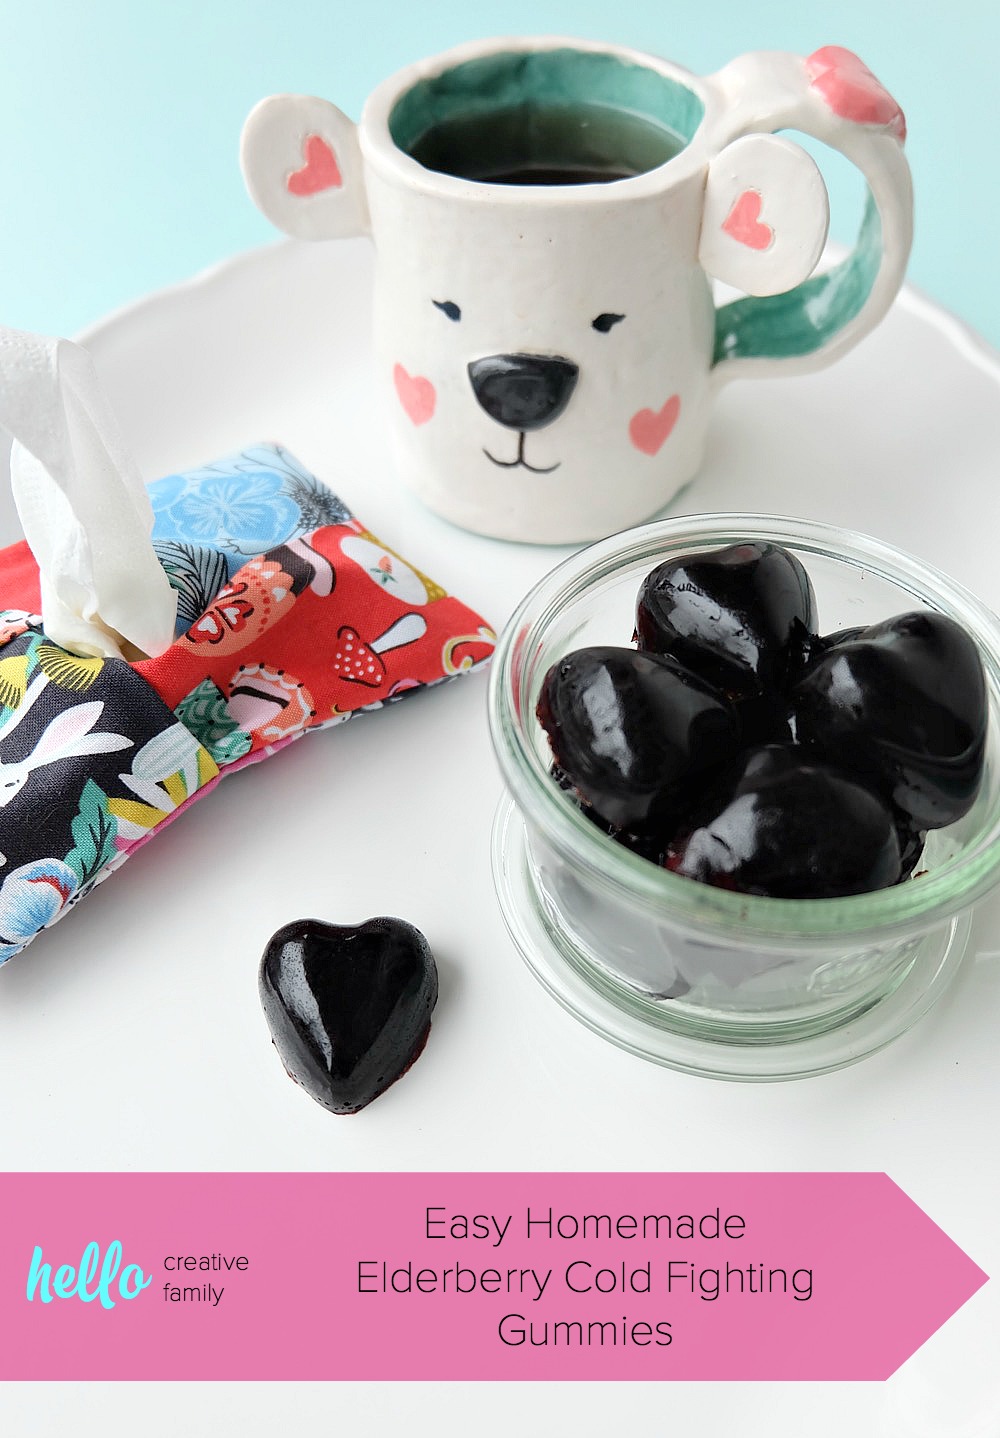 Sooth a sore throat and eliminate cold and flu symptoms with this easy, DIY cold remedy! This Easy Homemade Elderberry Cold Fighting Gummies recipe is great for cold prevention, boosting the immune system, soothing sore throats and helping your body kick a cold fast! Perfect for kids and adults! Also includes a recipe for elderberry syrup. #Recipe #Health #healthandwellness #DIY 